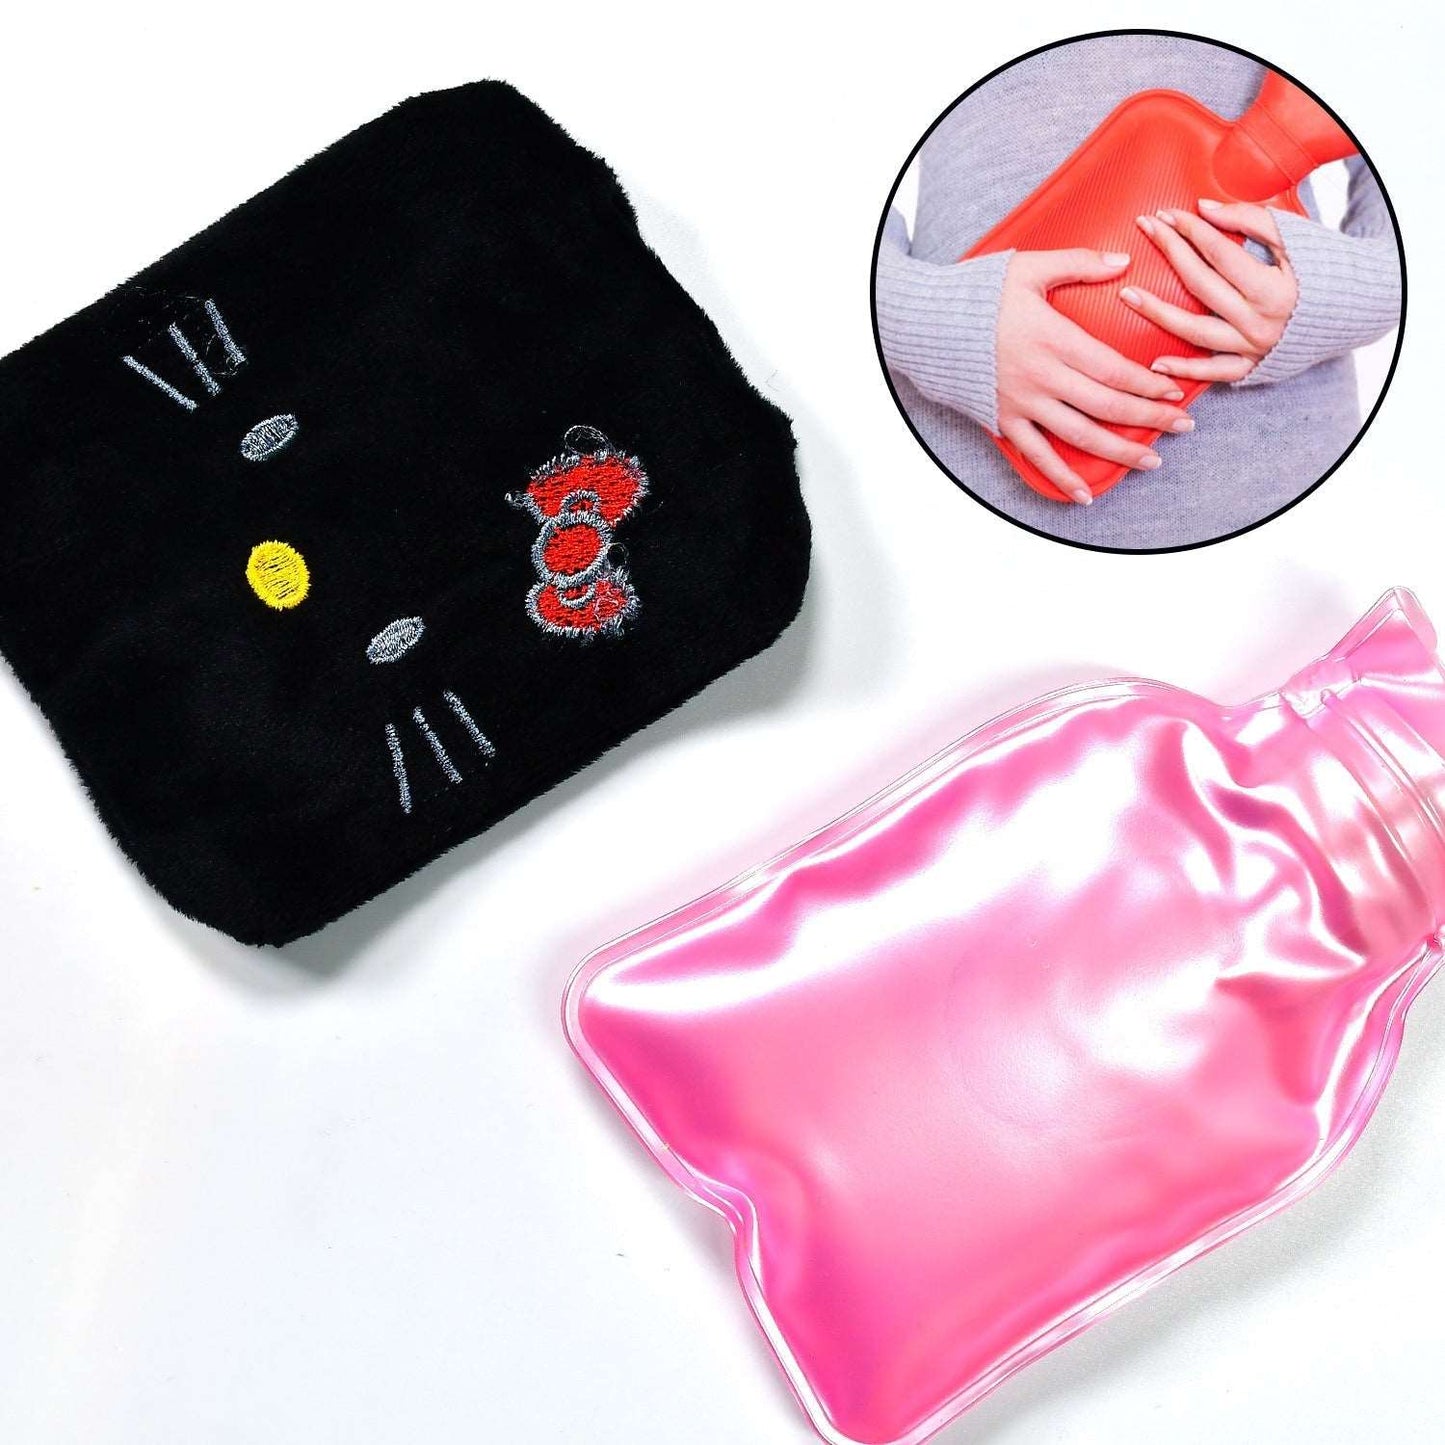 Black Hello Kitty small Hot Water Bag with Cover for Pain Relief, Neck, Shoulder Pain and Hand, Feet Warmer, Menstrual Cramps